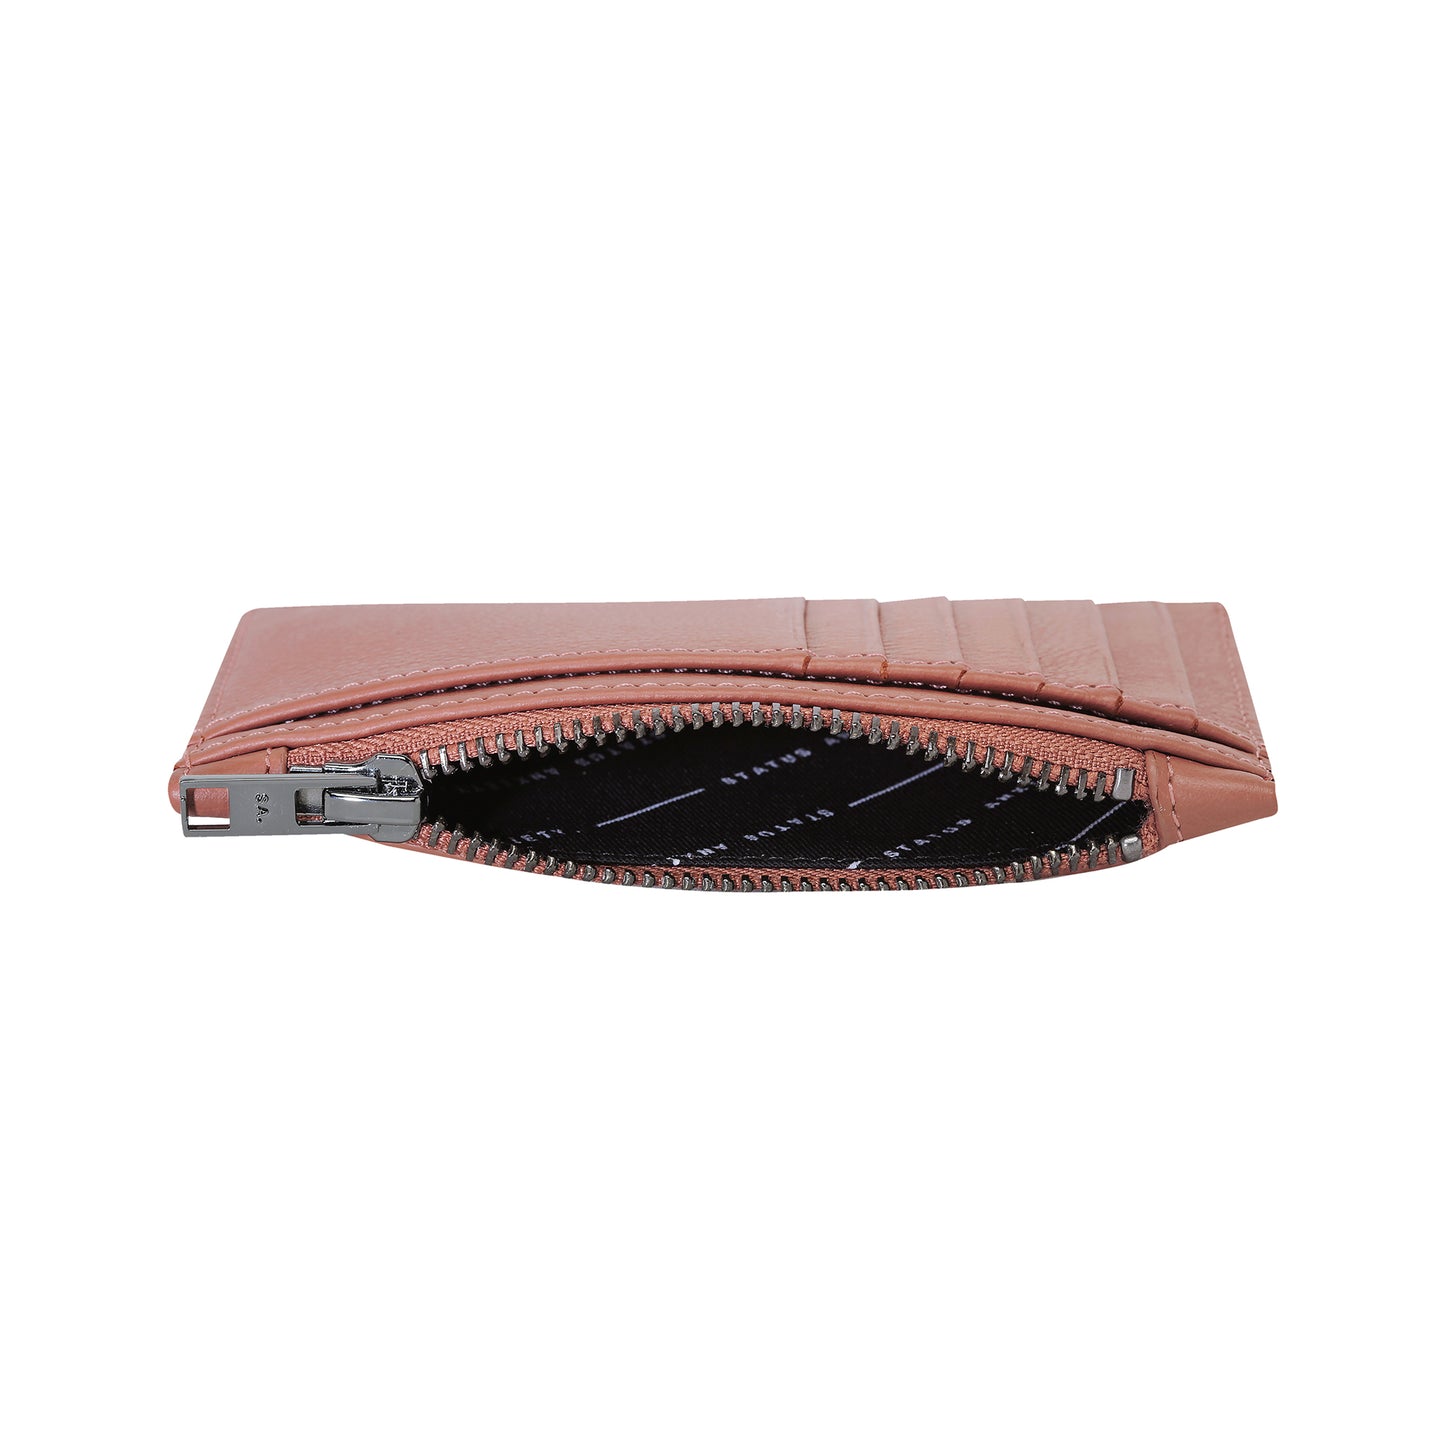 Avoiding things compact wallet dusty rose